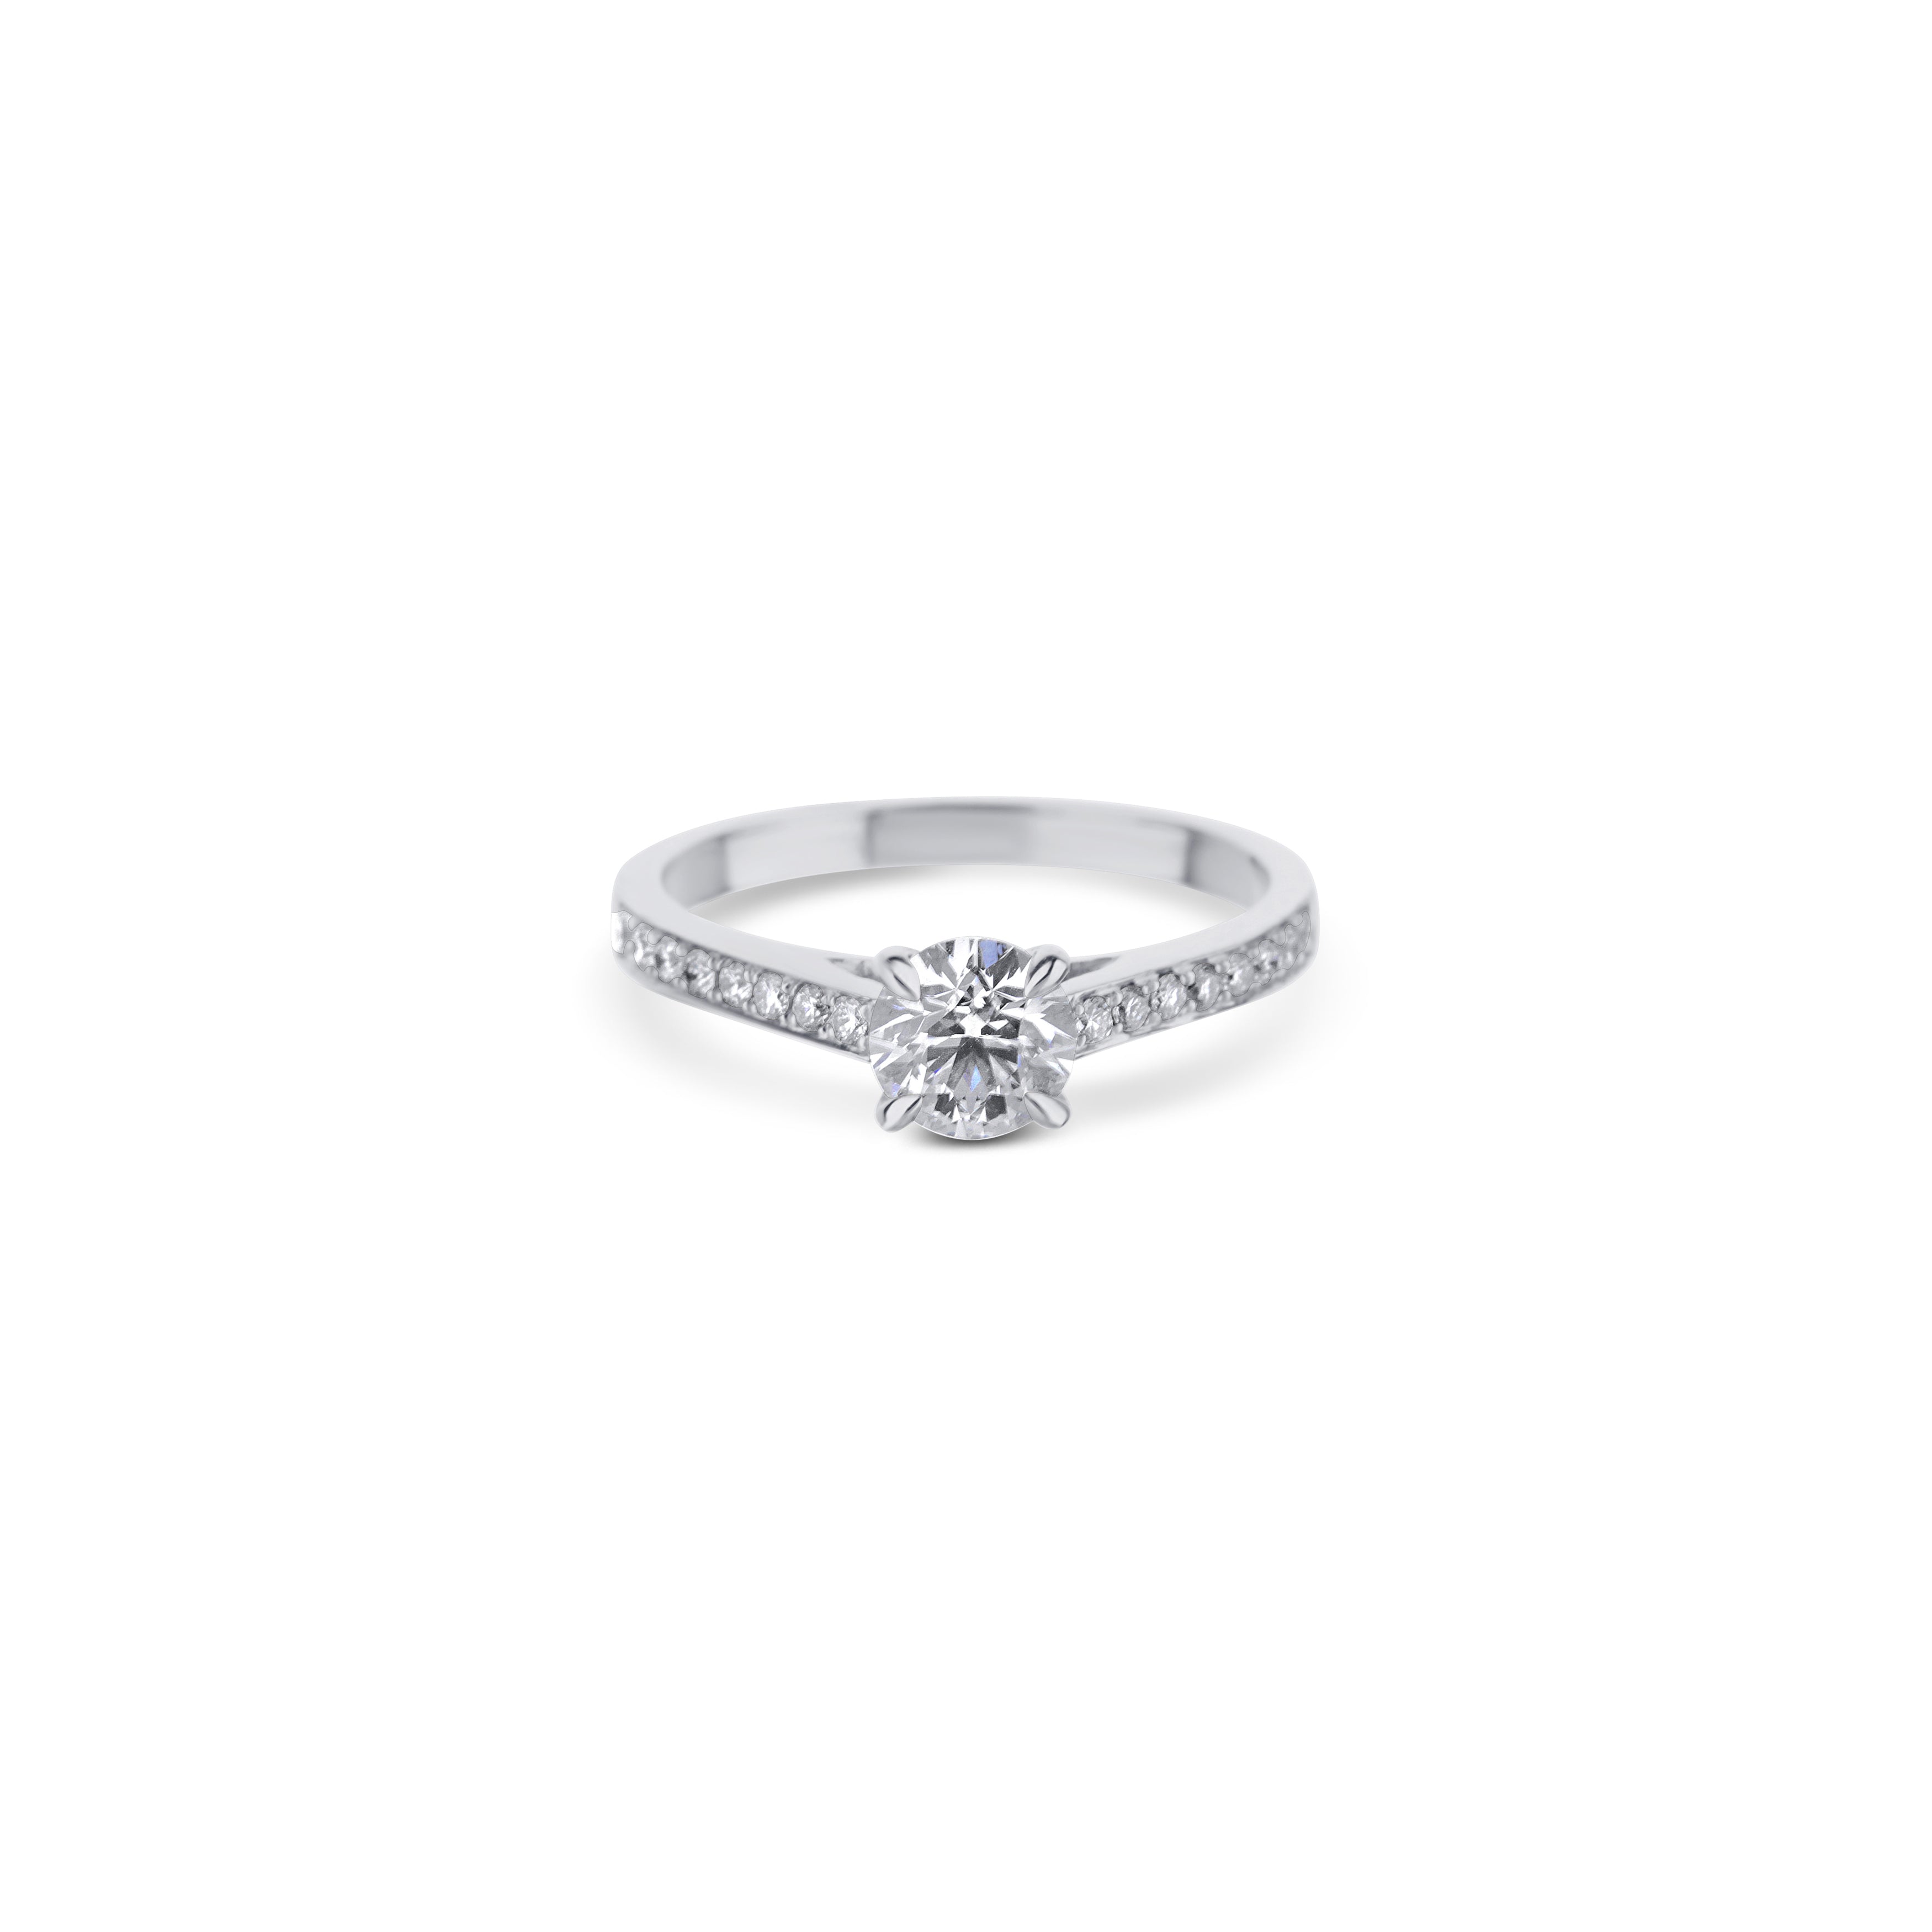 18K White Gold Ring With Round Diamond And A Cathedral Setting